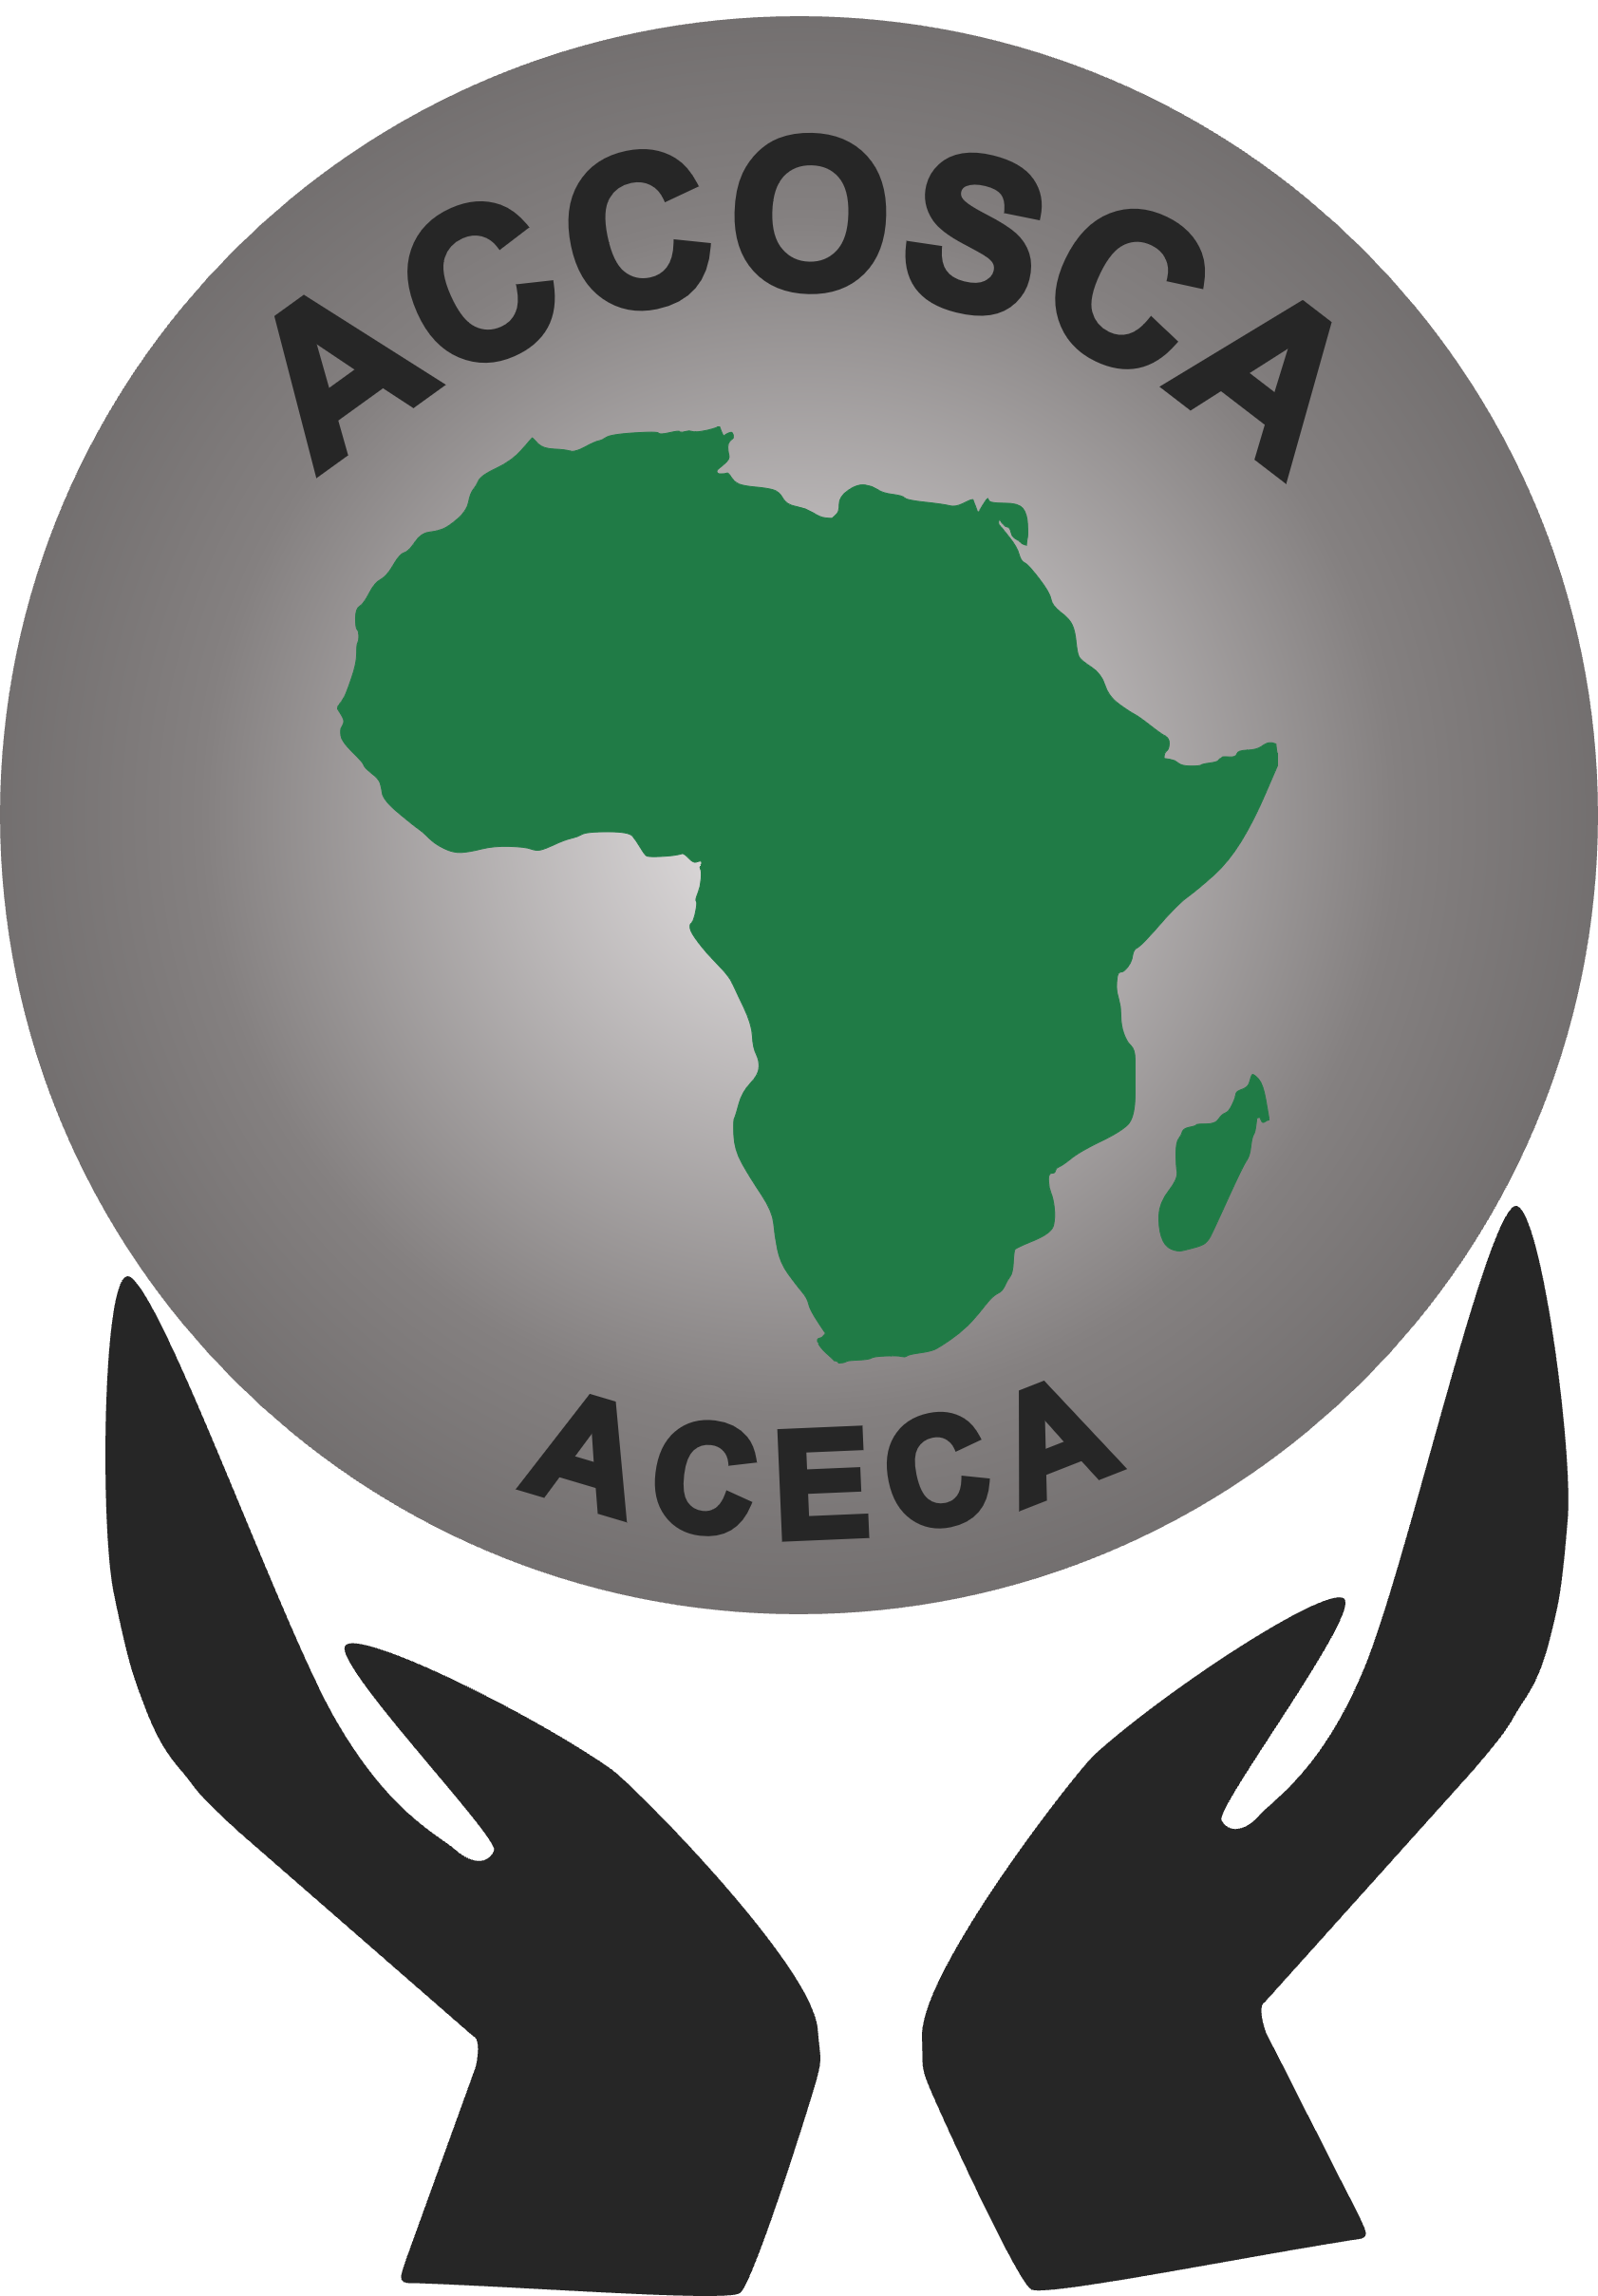 ACCOSCA || African Confederation of Cooperative Savings and Credit Associations